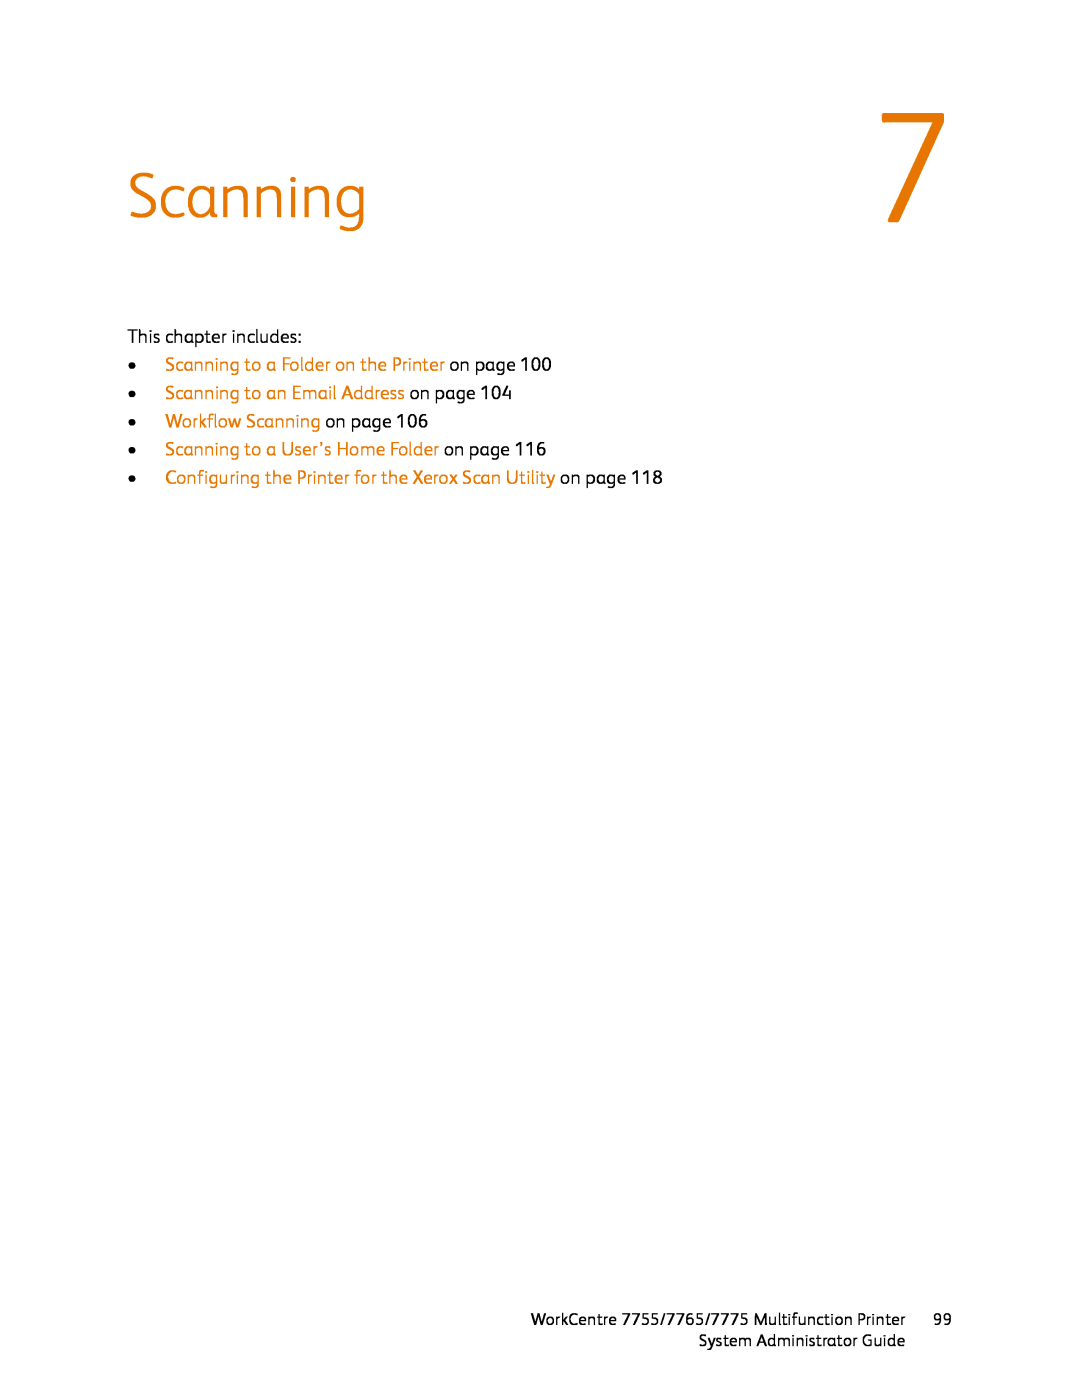 Xerox 7765, 7755, 7775 manual Scanning7, Scanning to a Folder on the Printer on page, •Scanning to an Email Address on page 